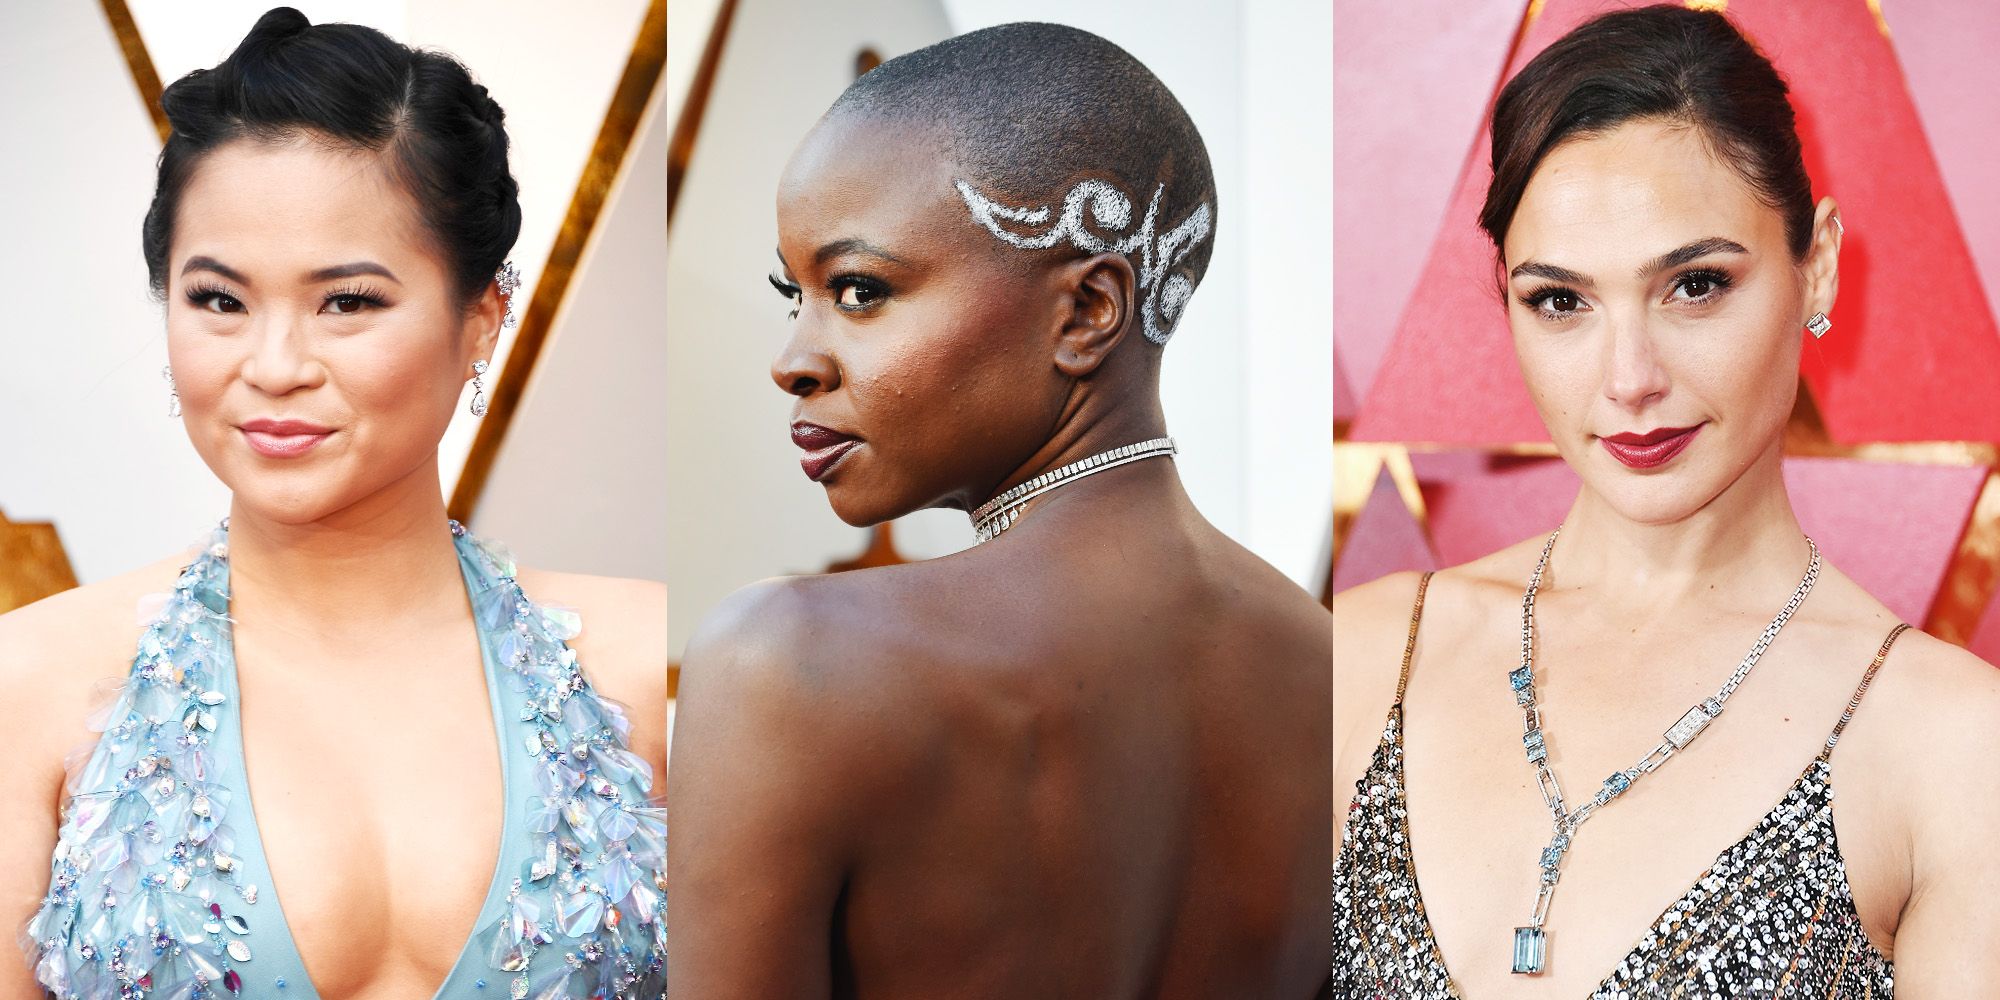 19 Oscars 2018 Best Makeup and Hairstyles - Celebrity Red Carpet Beauty  Looks